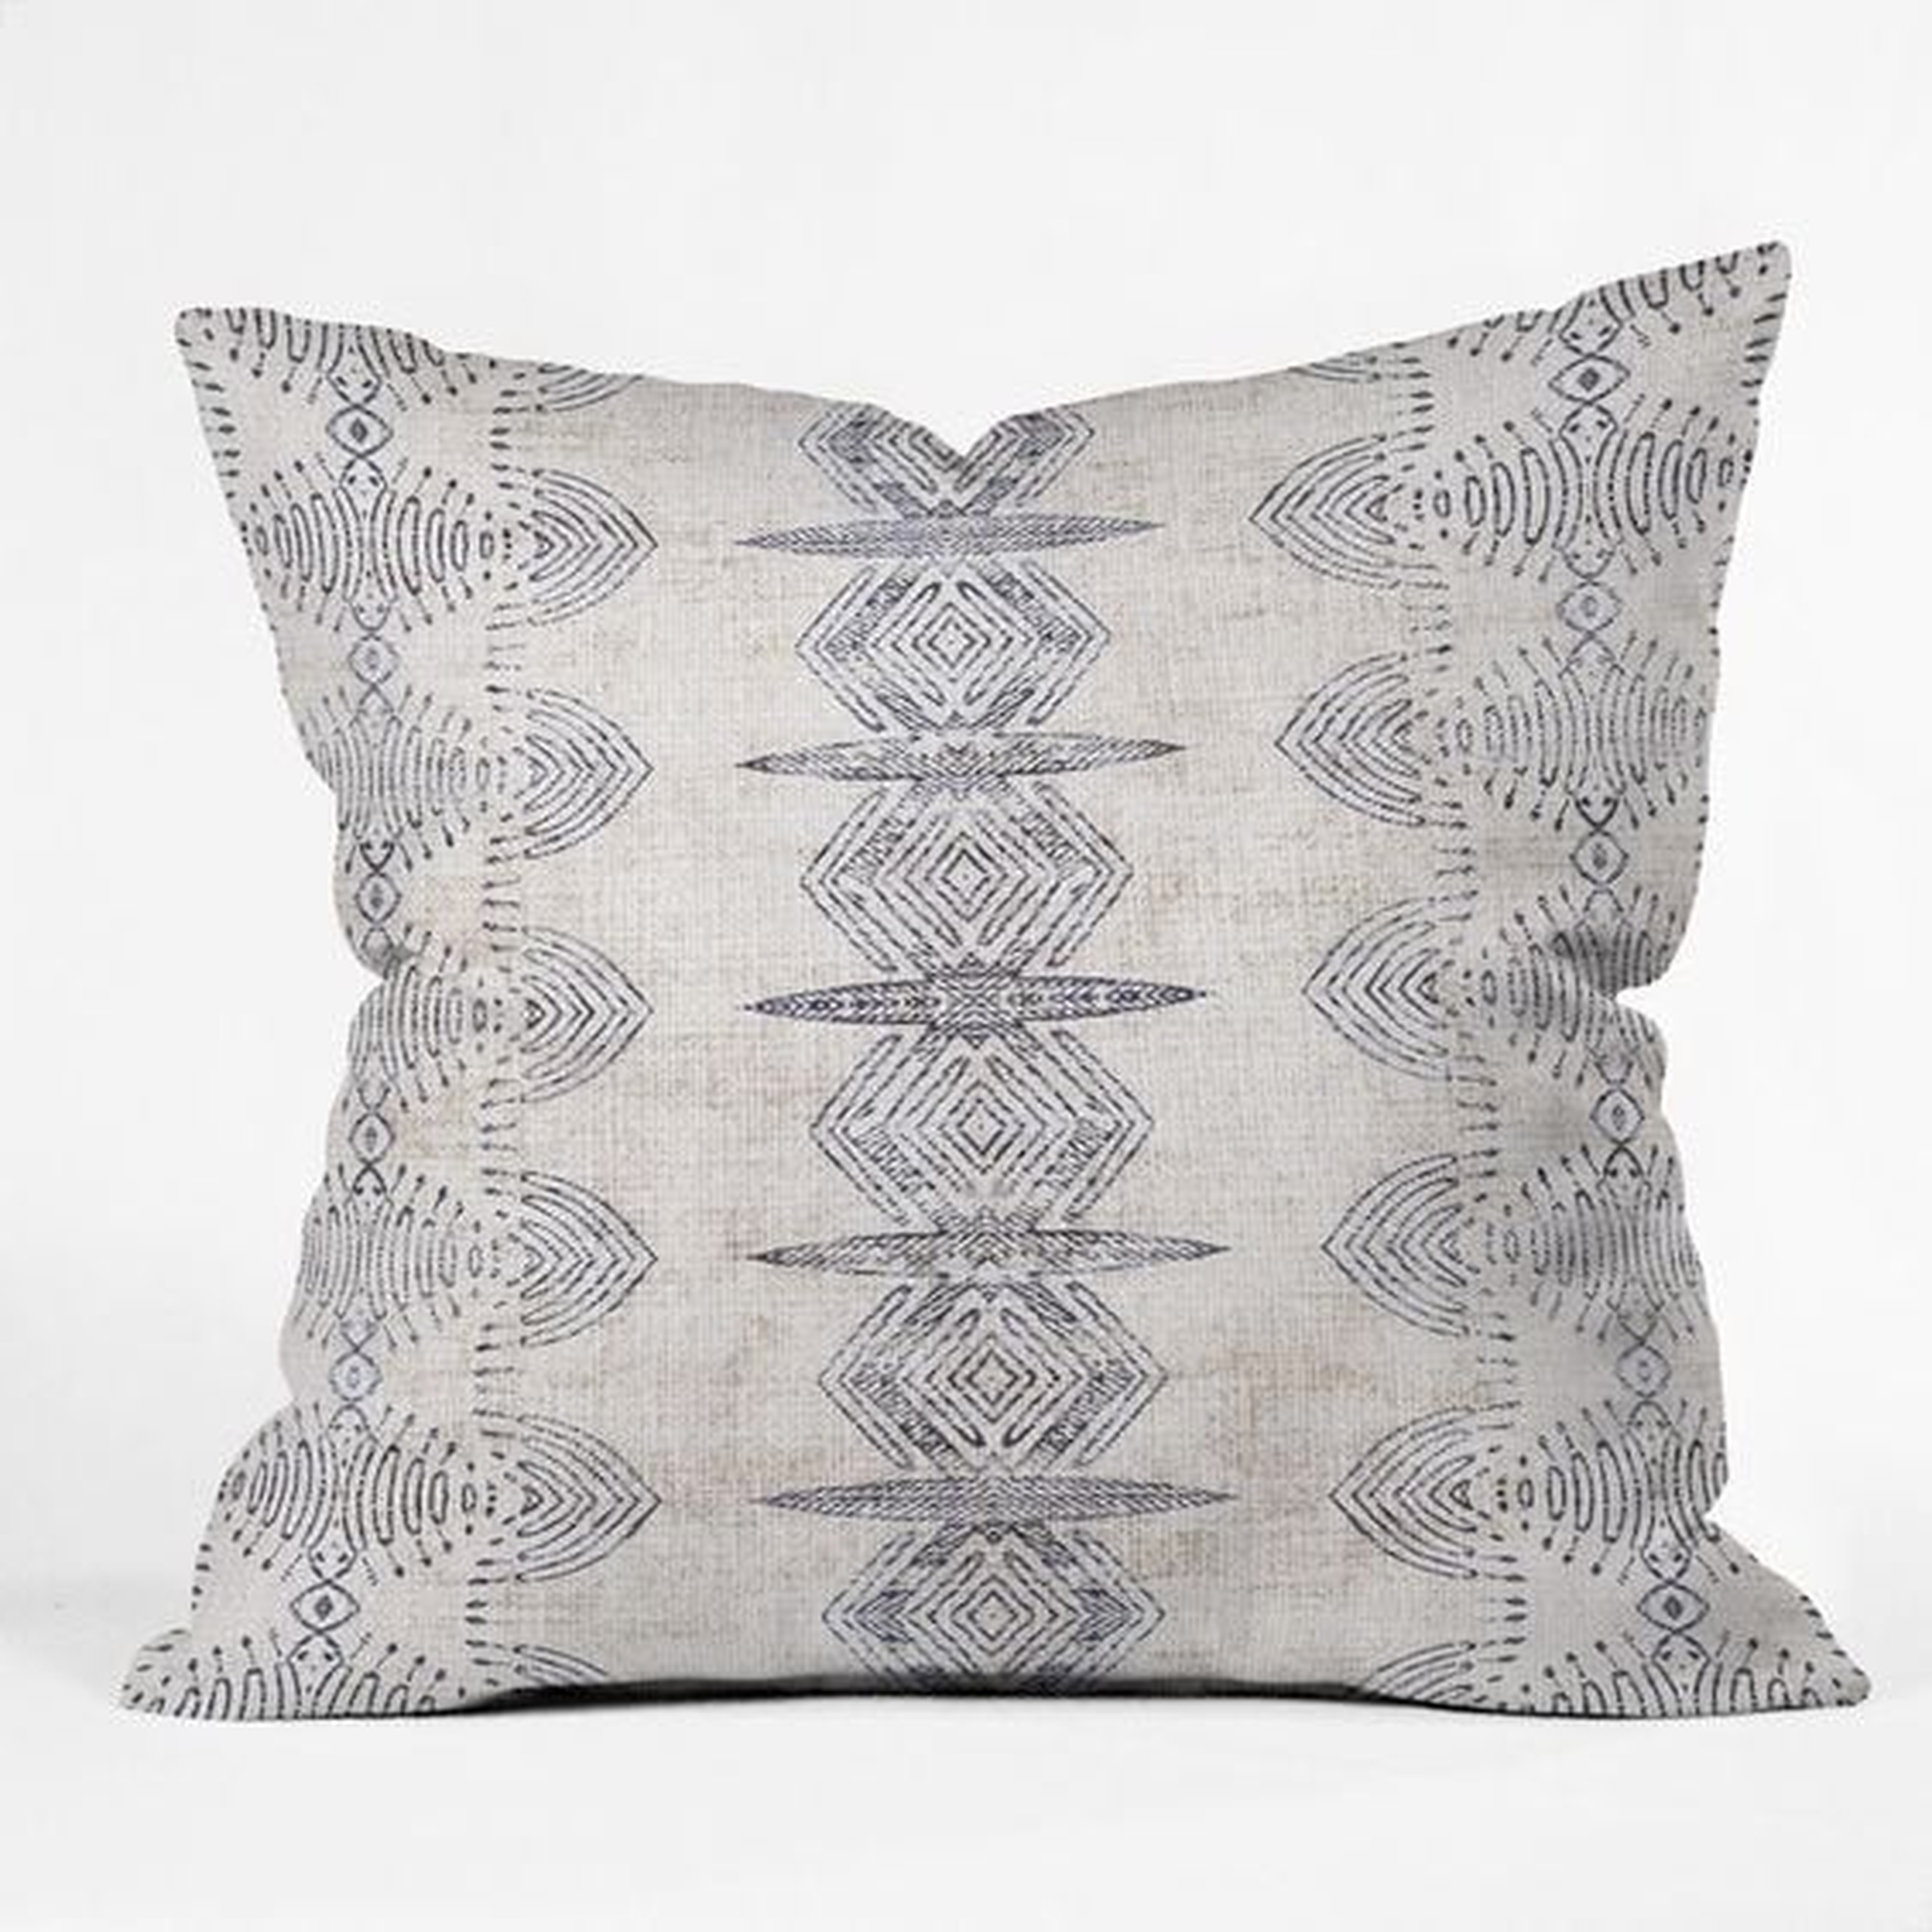 FRENCH LINEN ERIS Throw Pillow - 16x16 - Pillow Cover with insert - Wander Print Co.